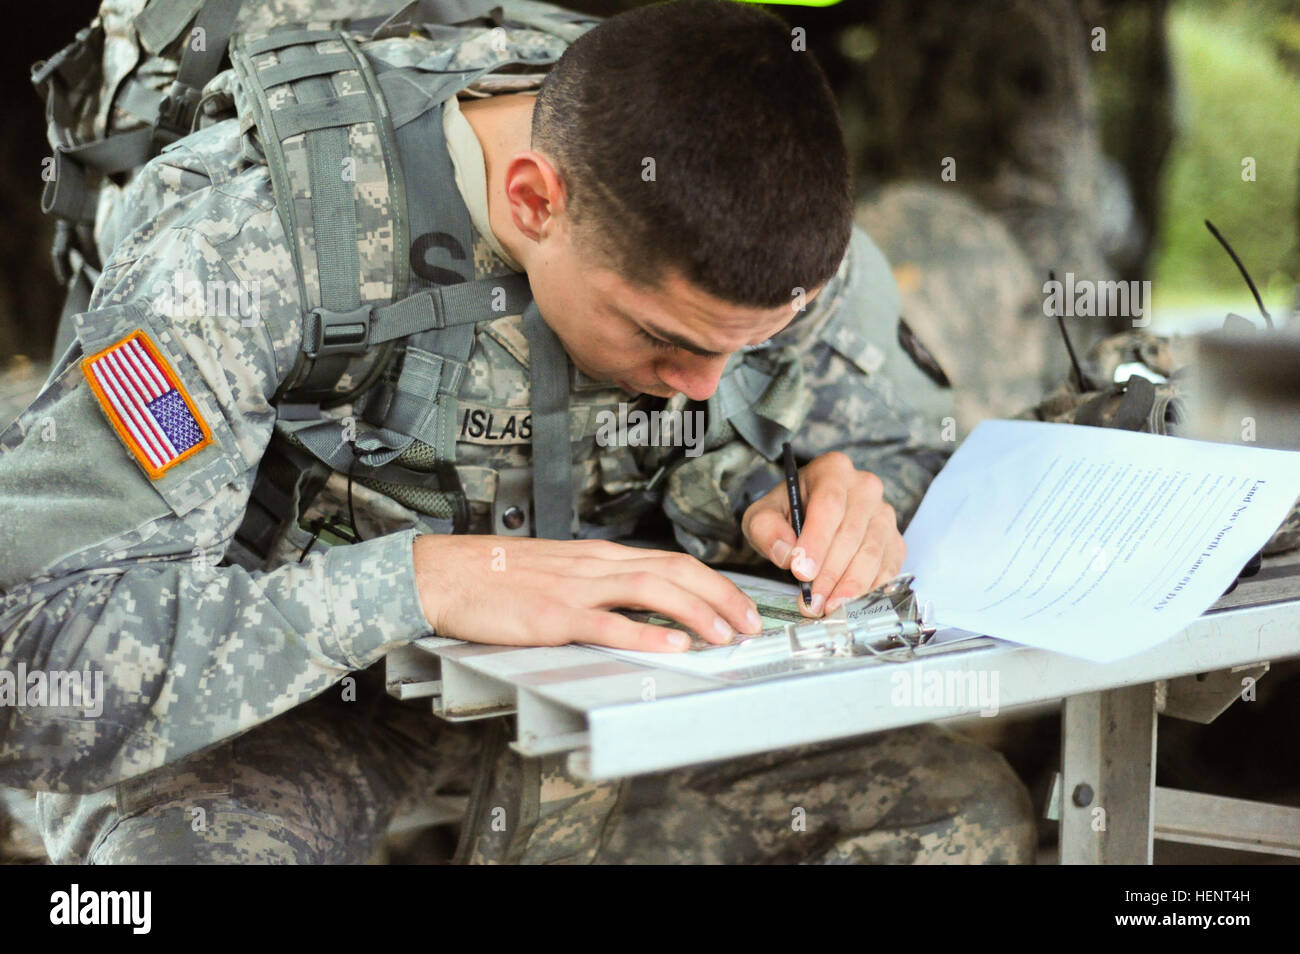 U.S. Army Spc. Paul Islas, assigned to D Company, 2-159th Attack Reconnaissance Battalion, 12th Combat Aviation Brigade,  plots coordinates on a map during the land navigation portion of the  European Best Warrior Competition in Grafenwoehr, Germany, Sept. 14, 2014. The competition is a weeklong event that pushes Soldiers to the limits of their physical stamina, bearing, knowledge, adaptability and technical and tactical skills. The best warriors are ready and resilient Soldiers who live the Army values and lead from the front. (U.S. Army photo by Staff Sgt. Pablo N. Piedra/Released) European  Stock Photo